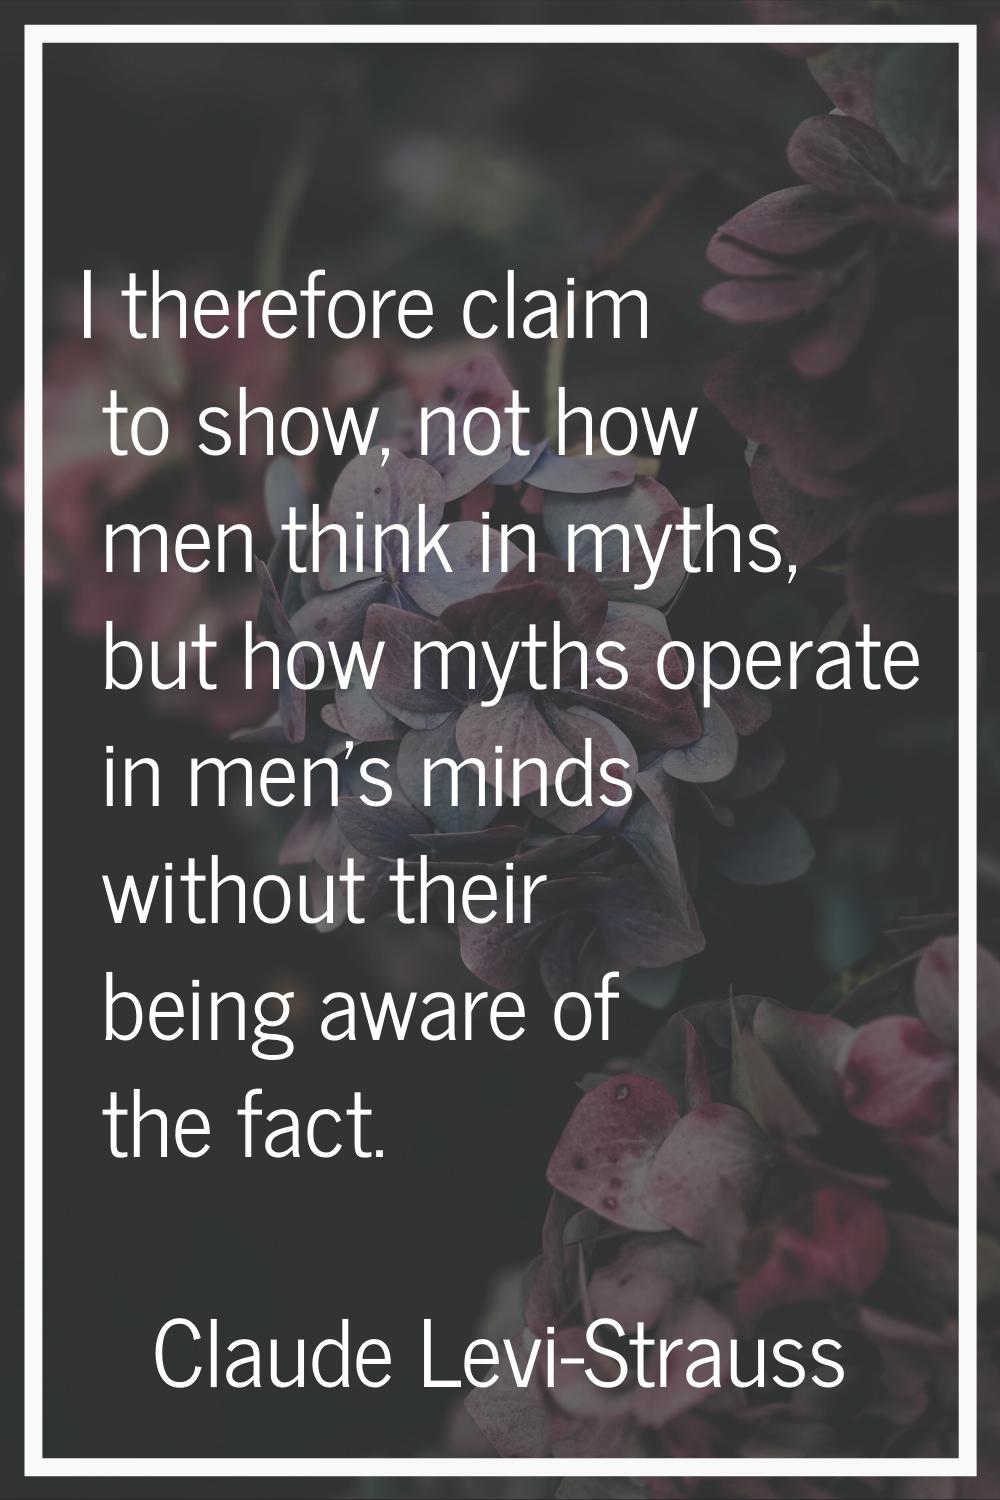 I therefore claim to show, not how men think in myths, but how myths operate in men's minds without